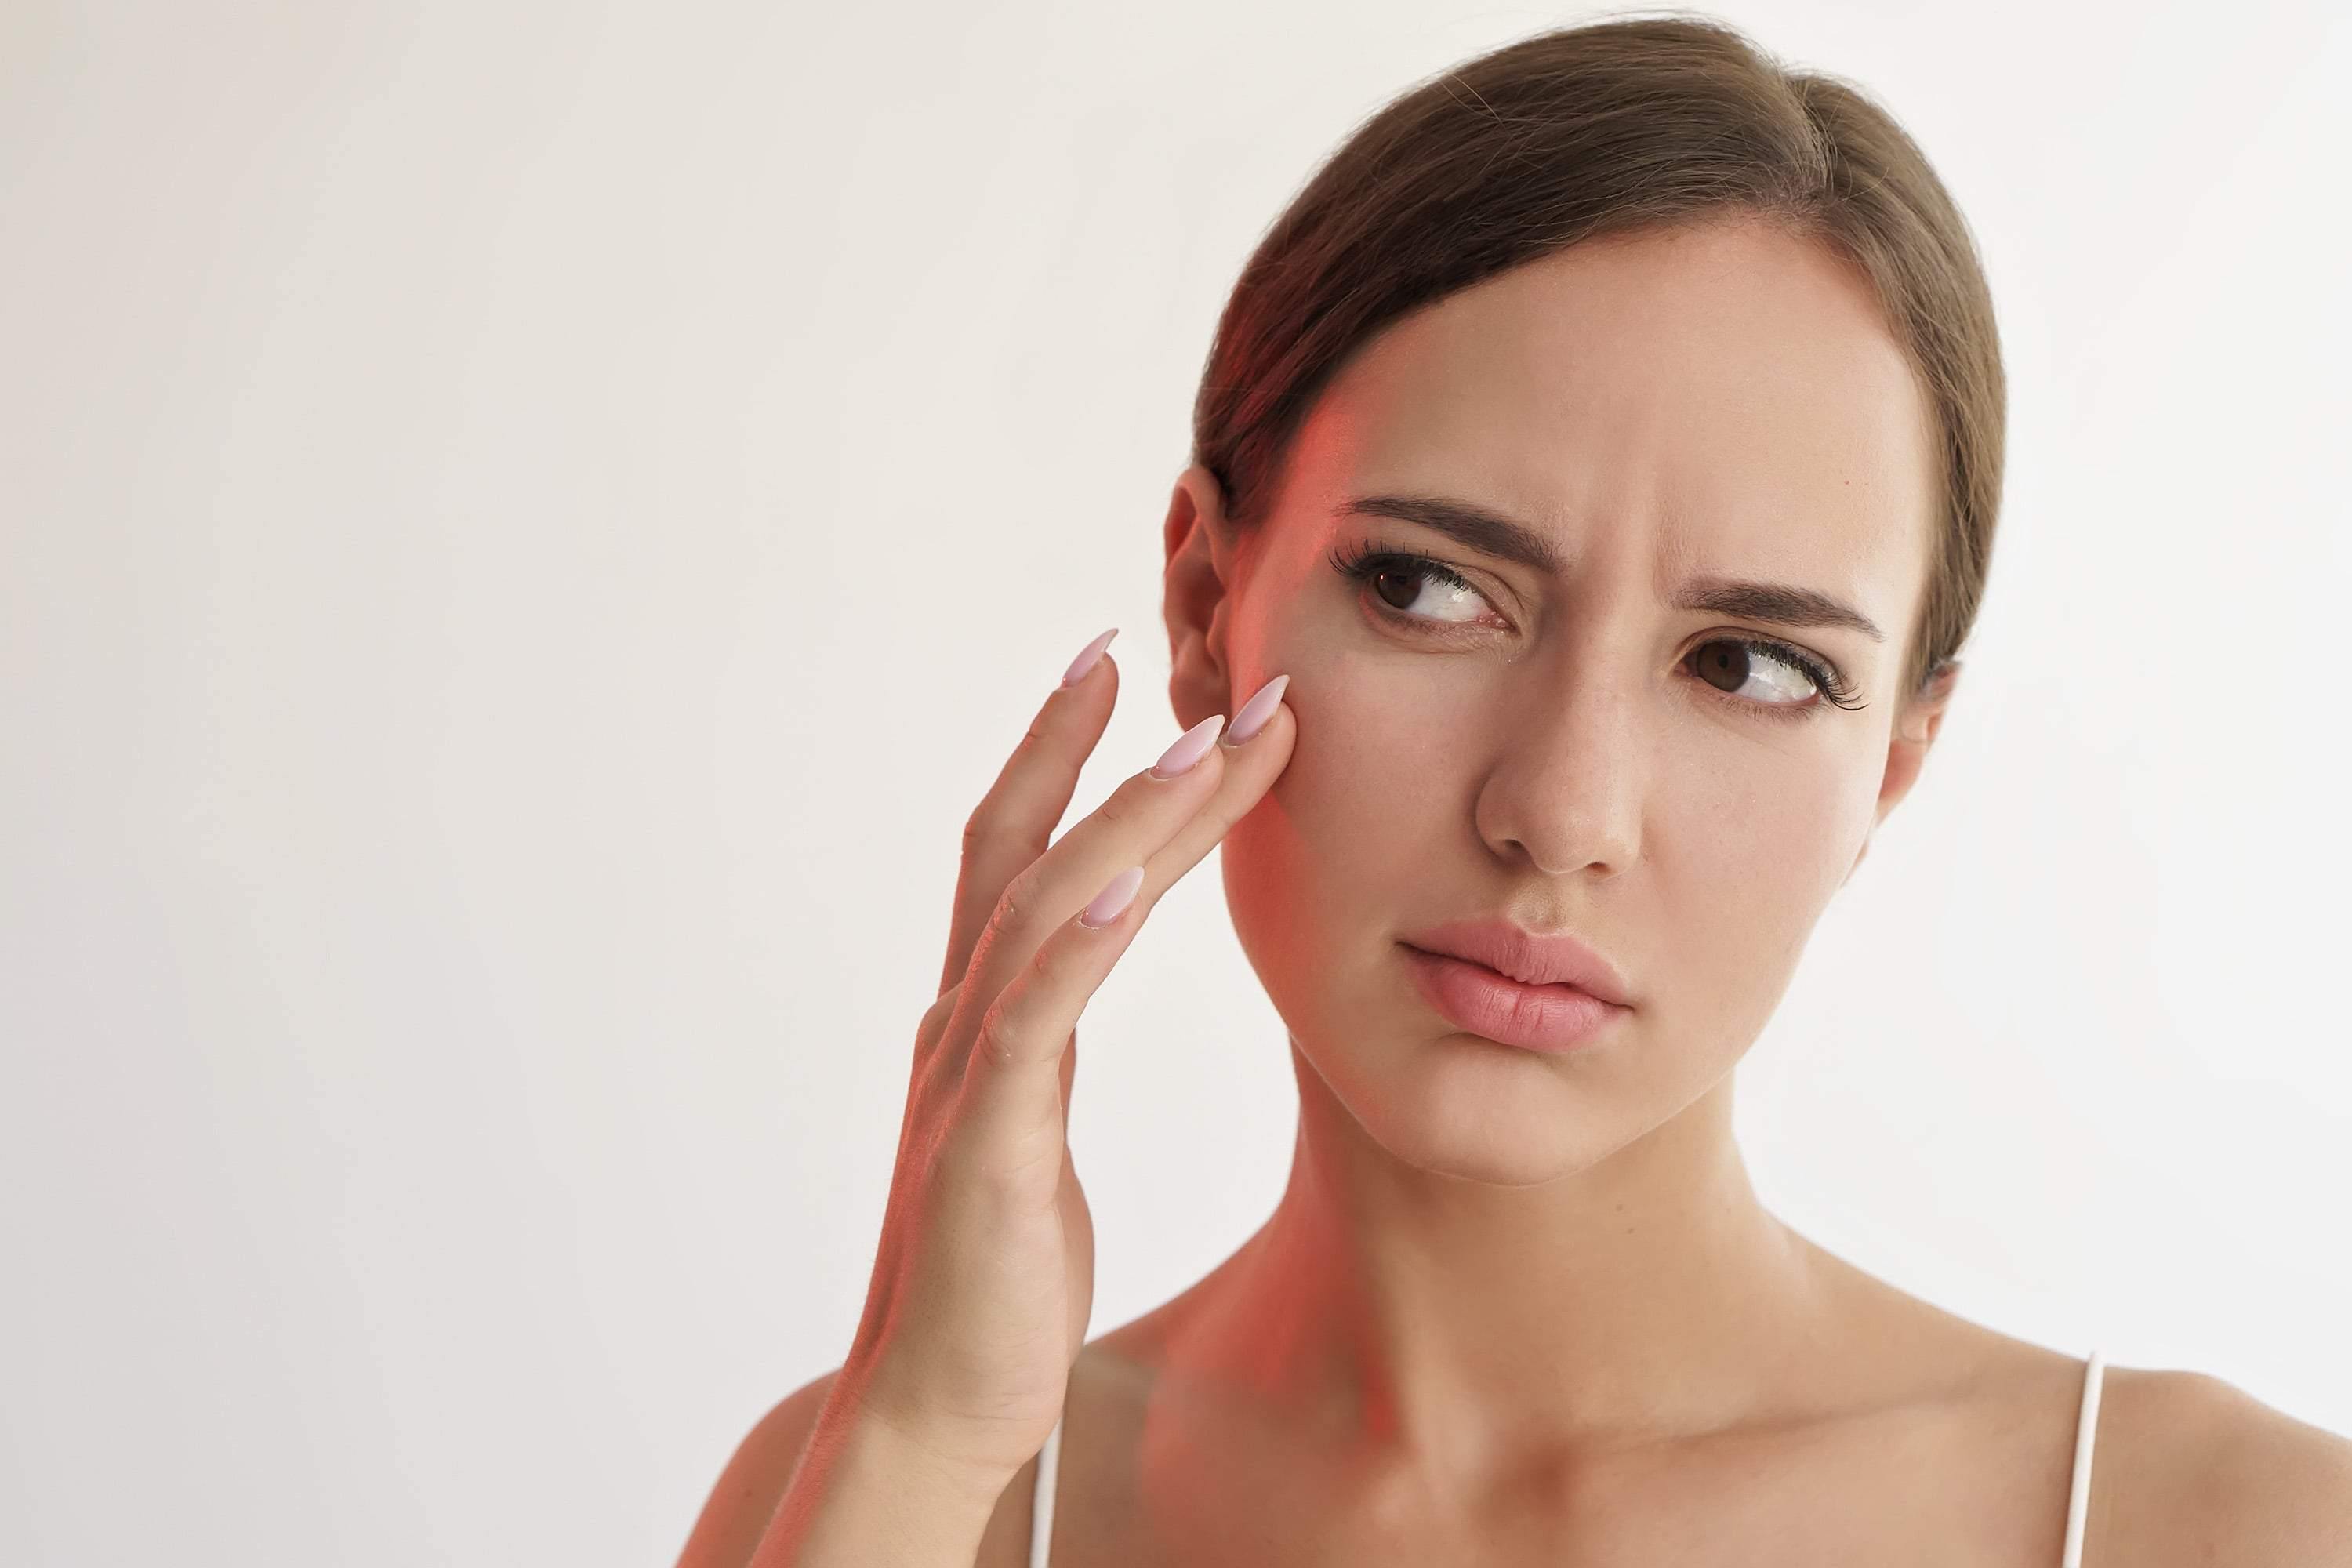 Dry Skin: What Causes It and What Can You Do About It?